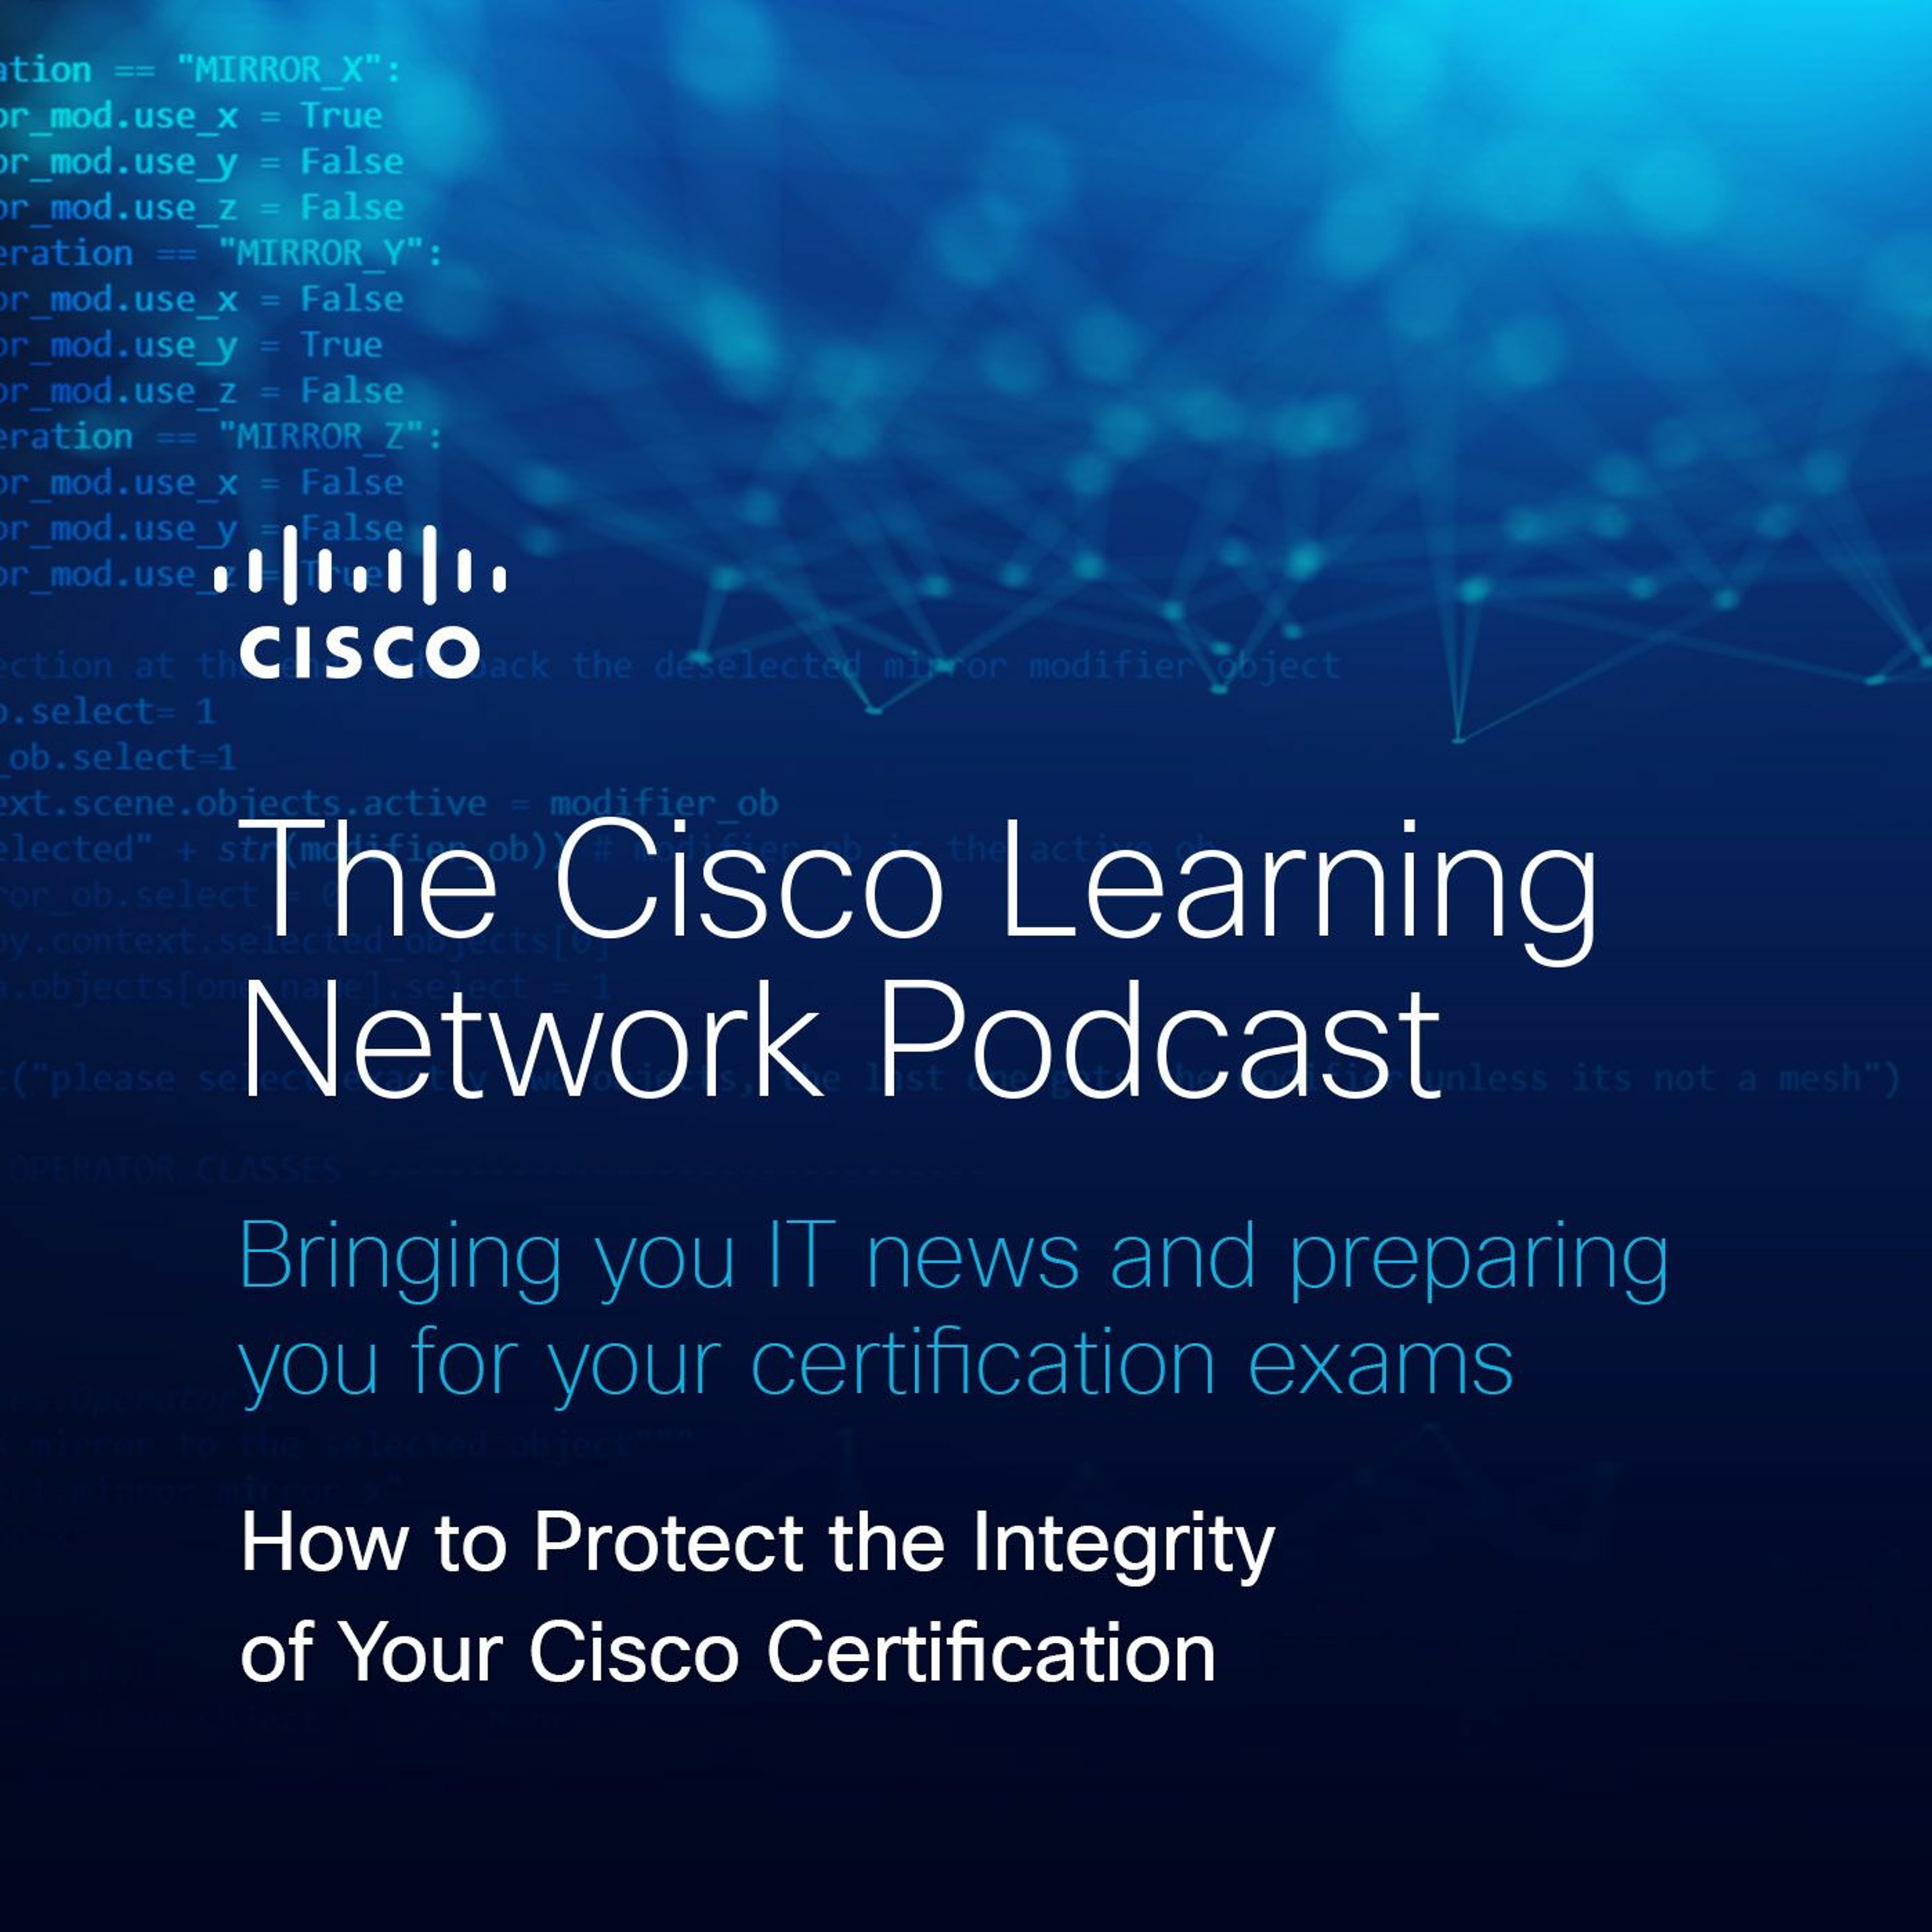 How to Protect the Integrity of Your Cisco Certification